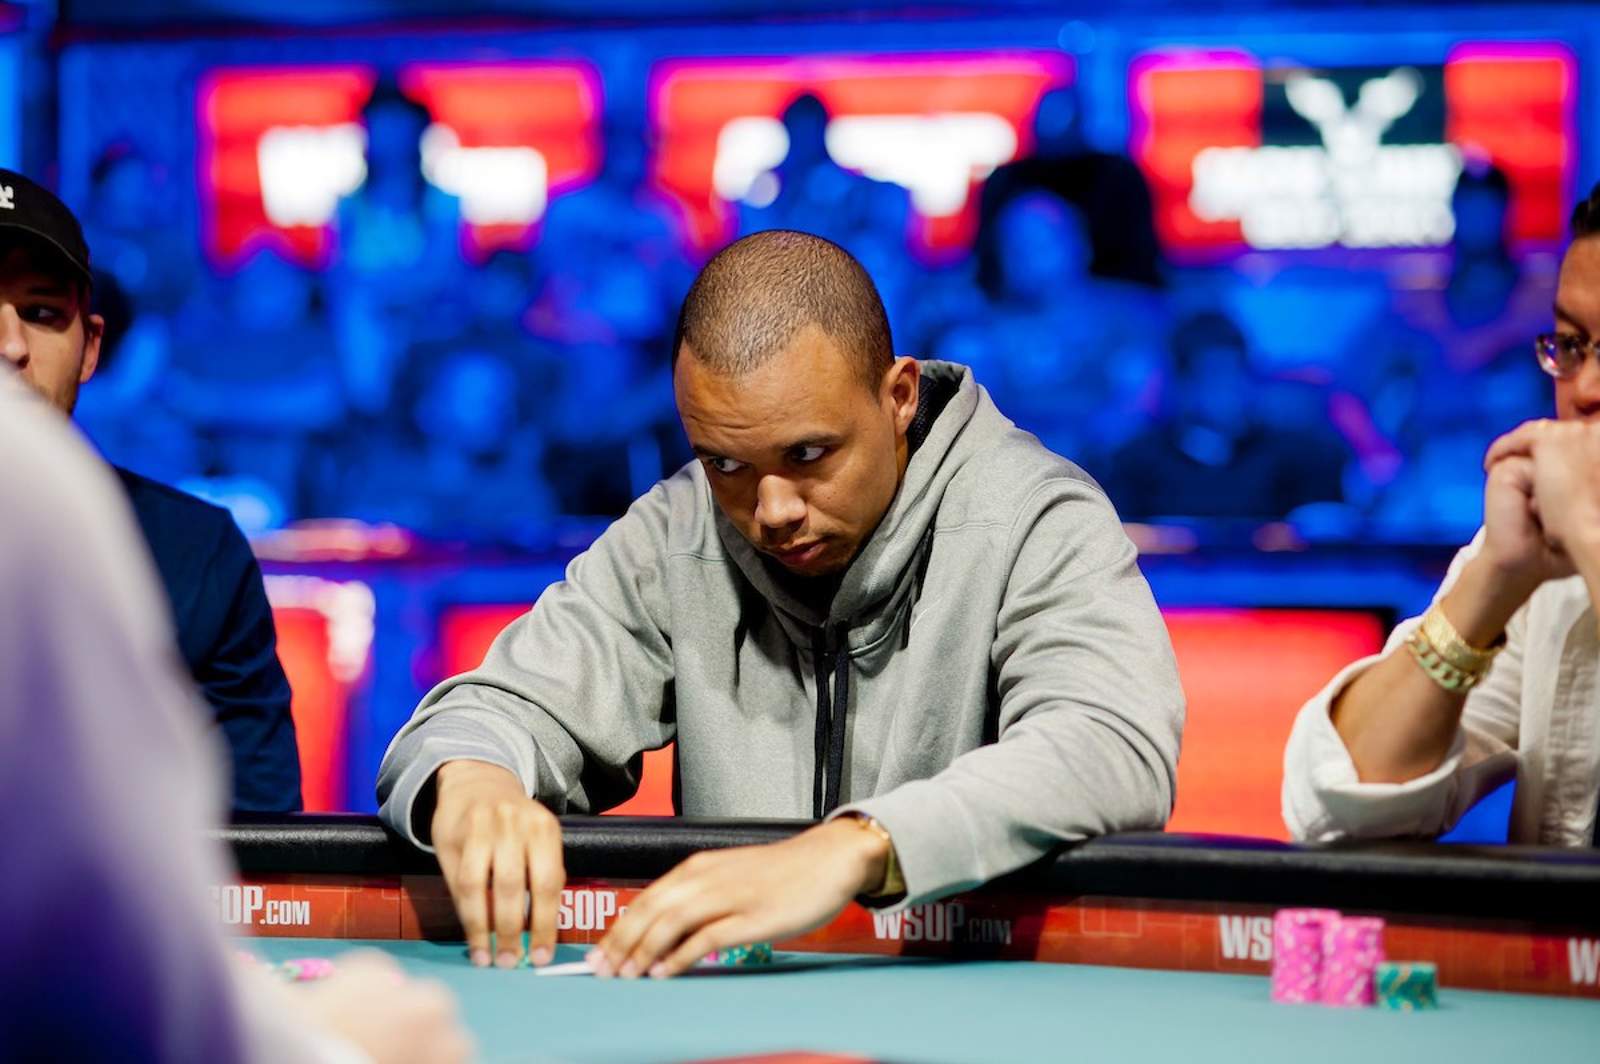 Ep. 58 Farewell Phil Ivey?